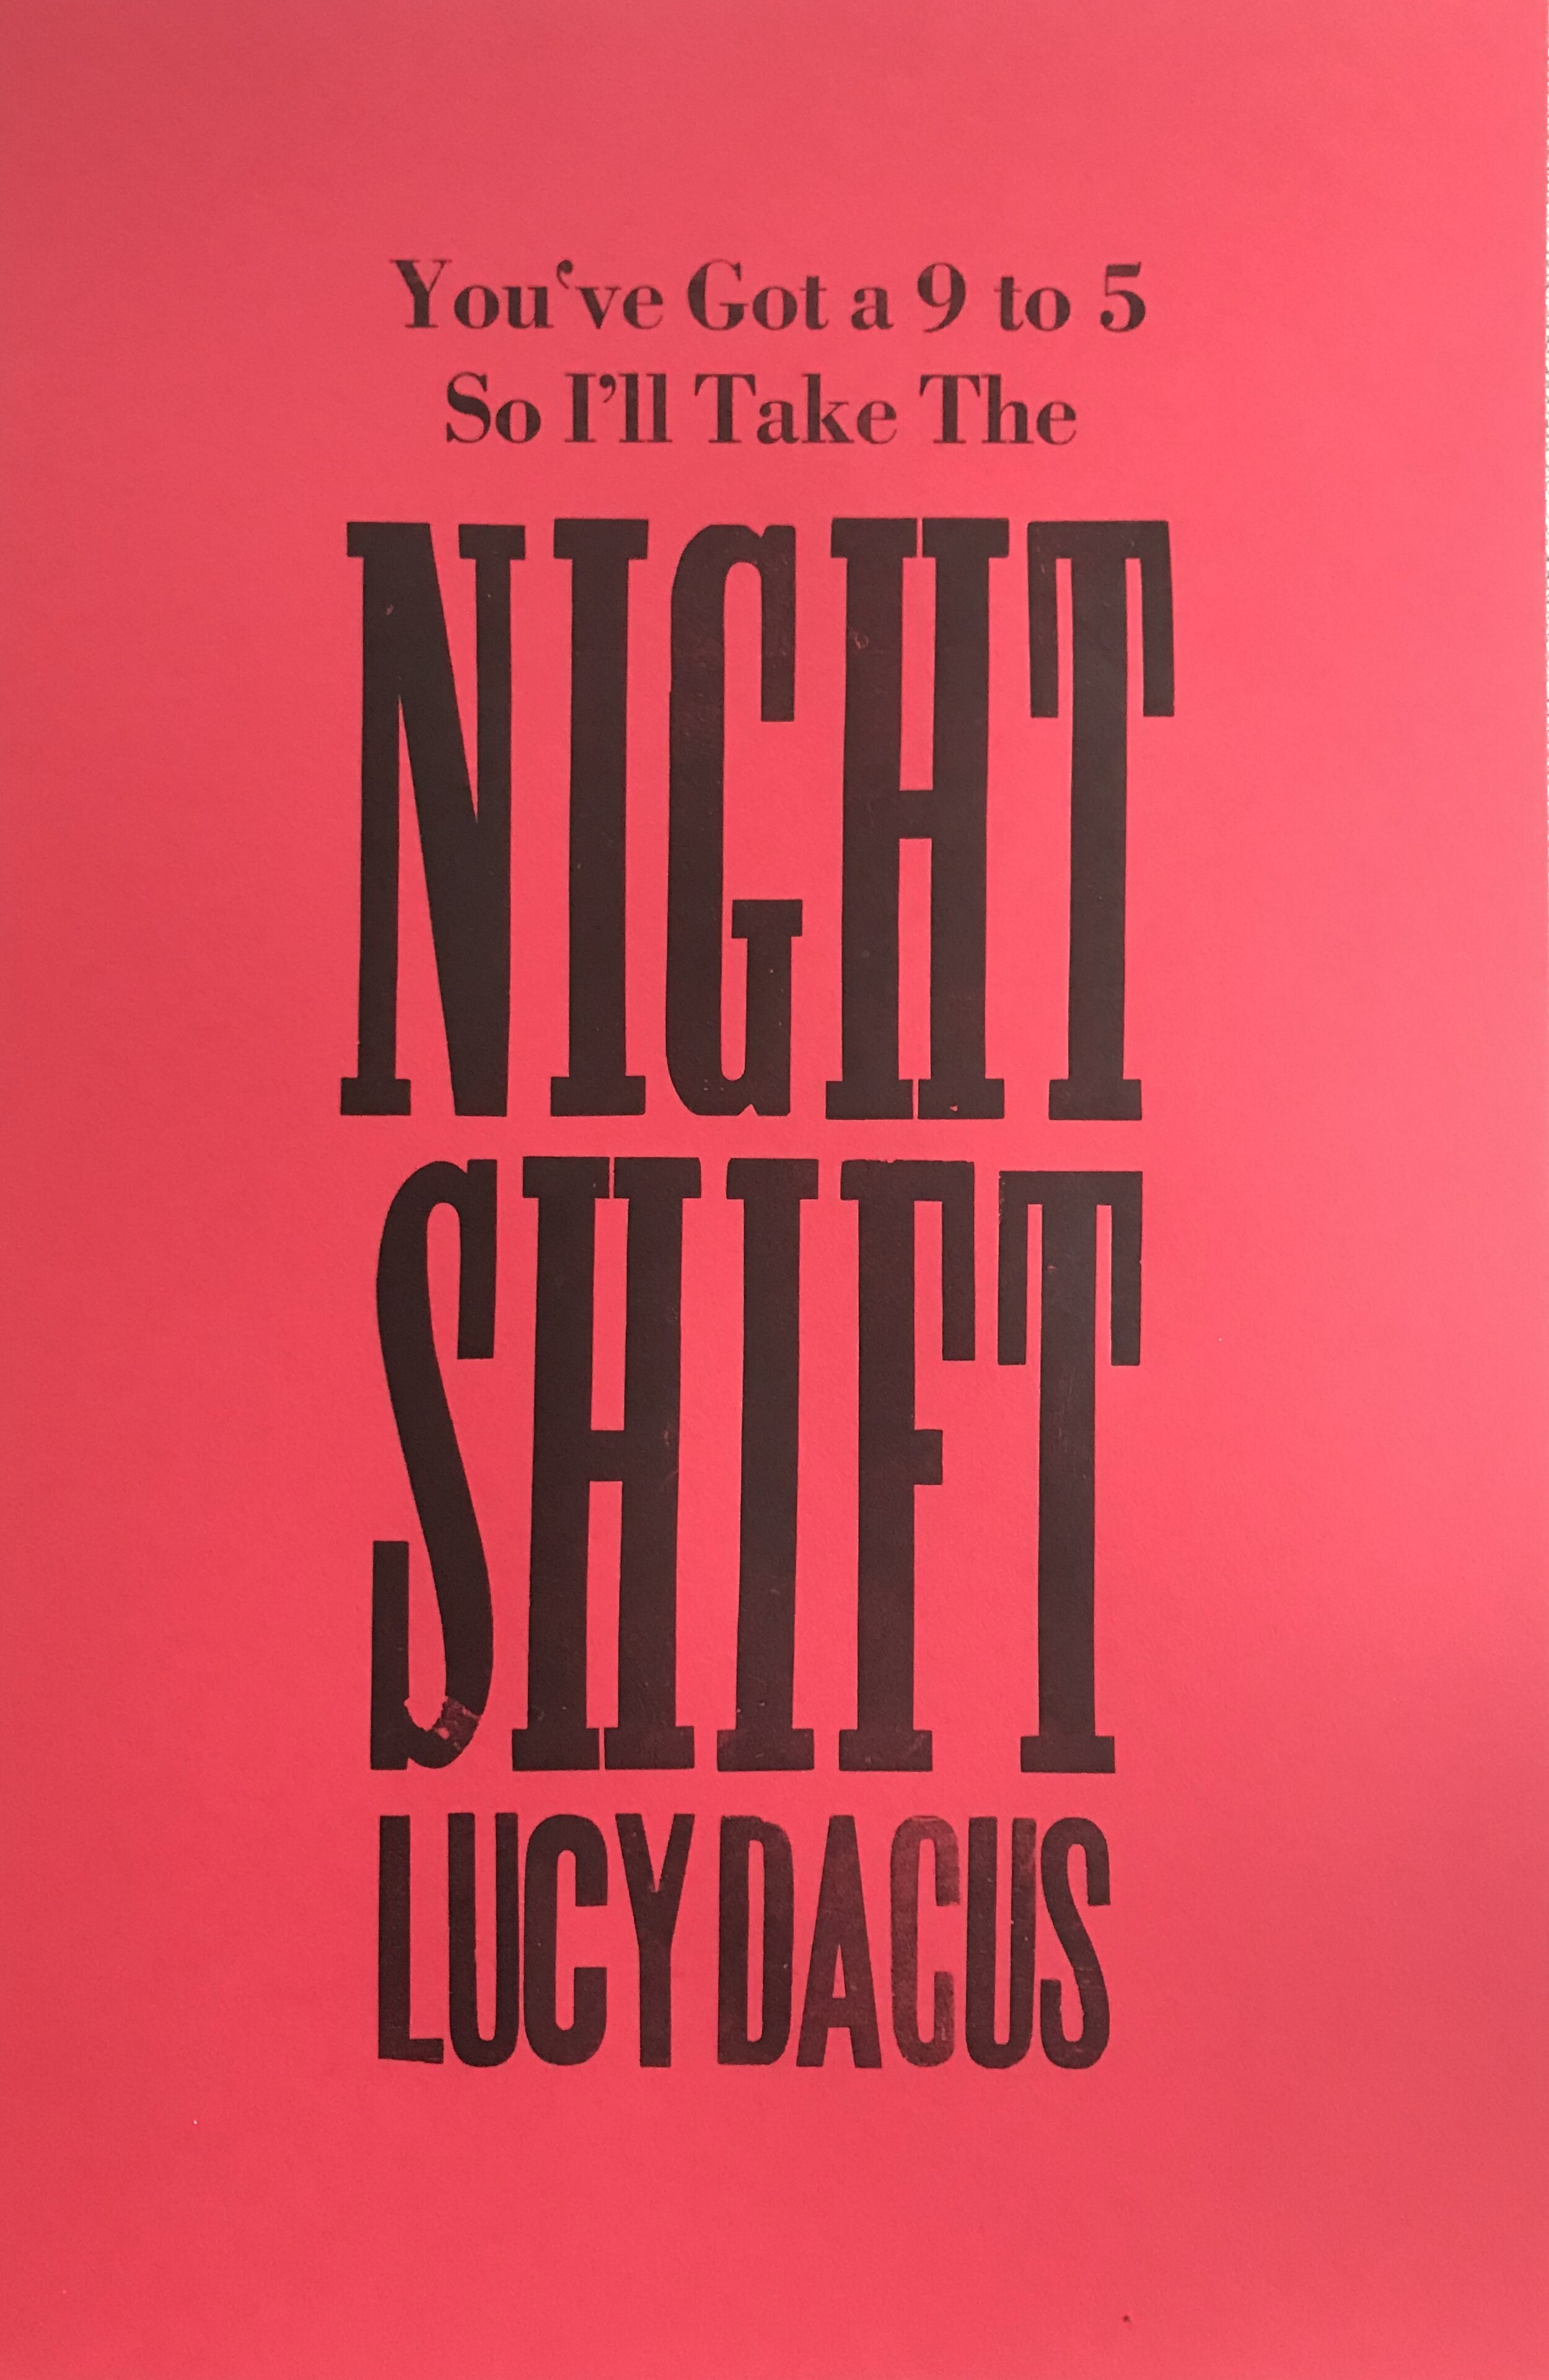 Night Shift by Lucy Dacus Vintage Song Lyrics on Parchment